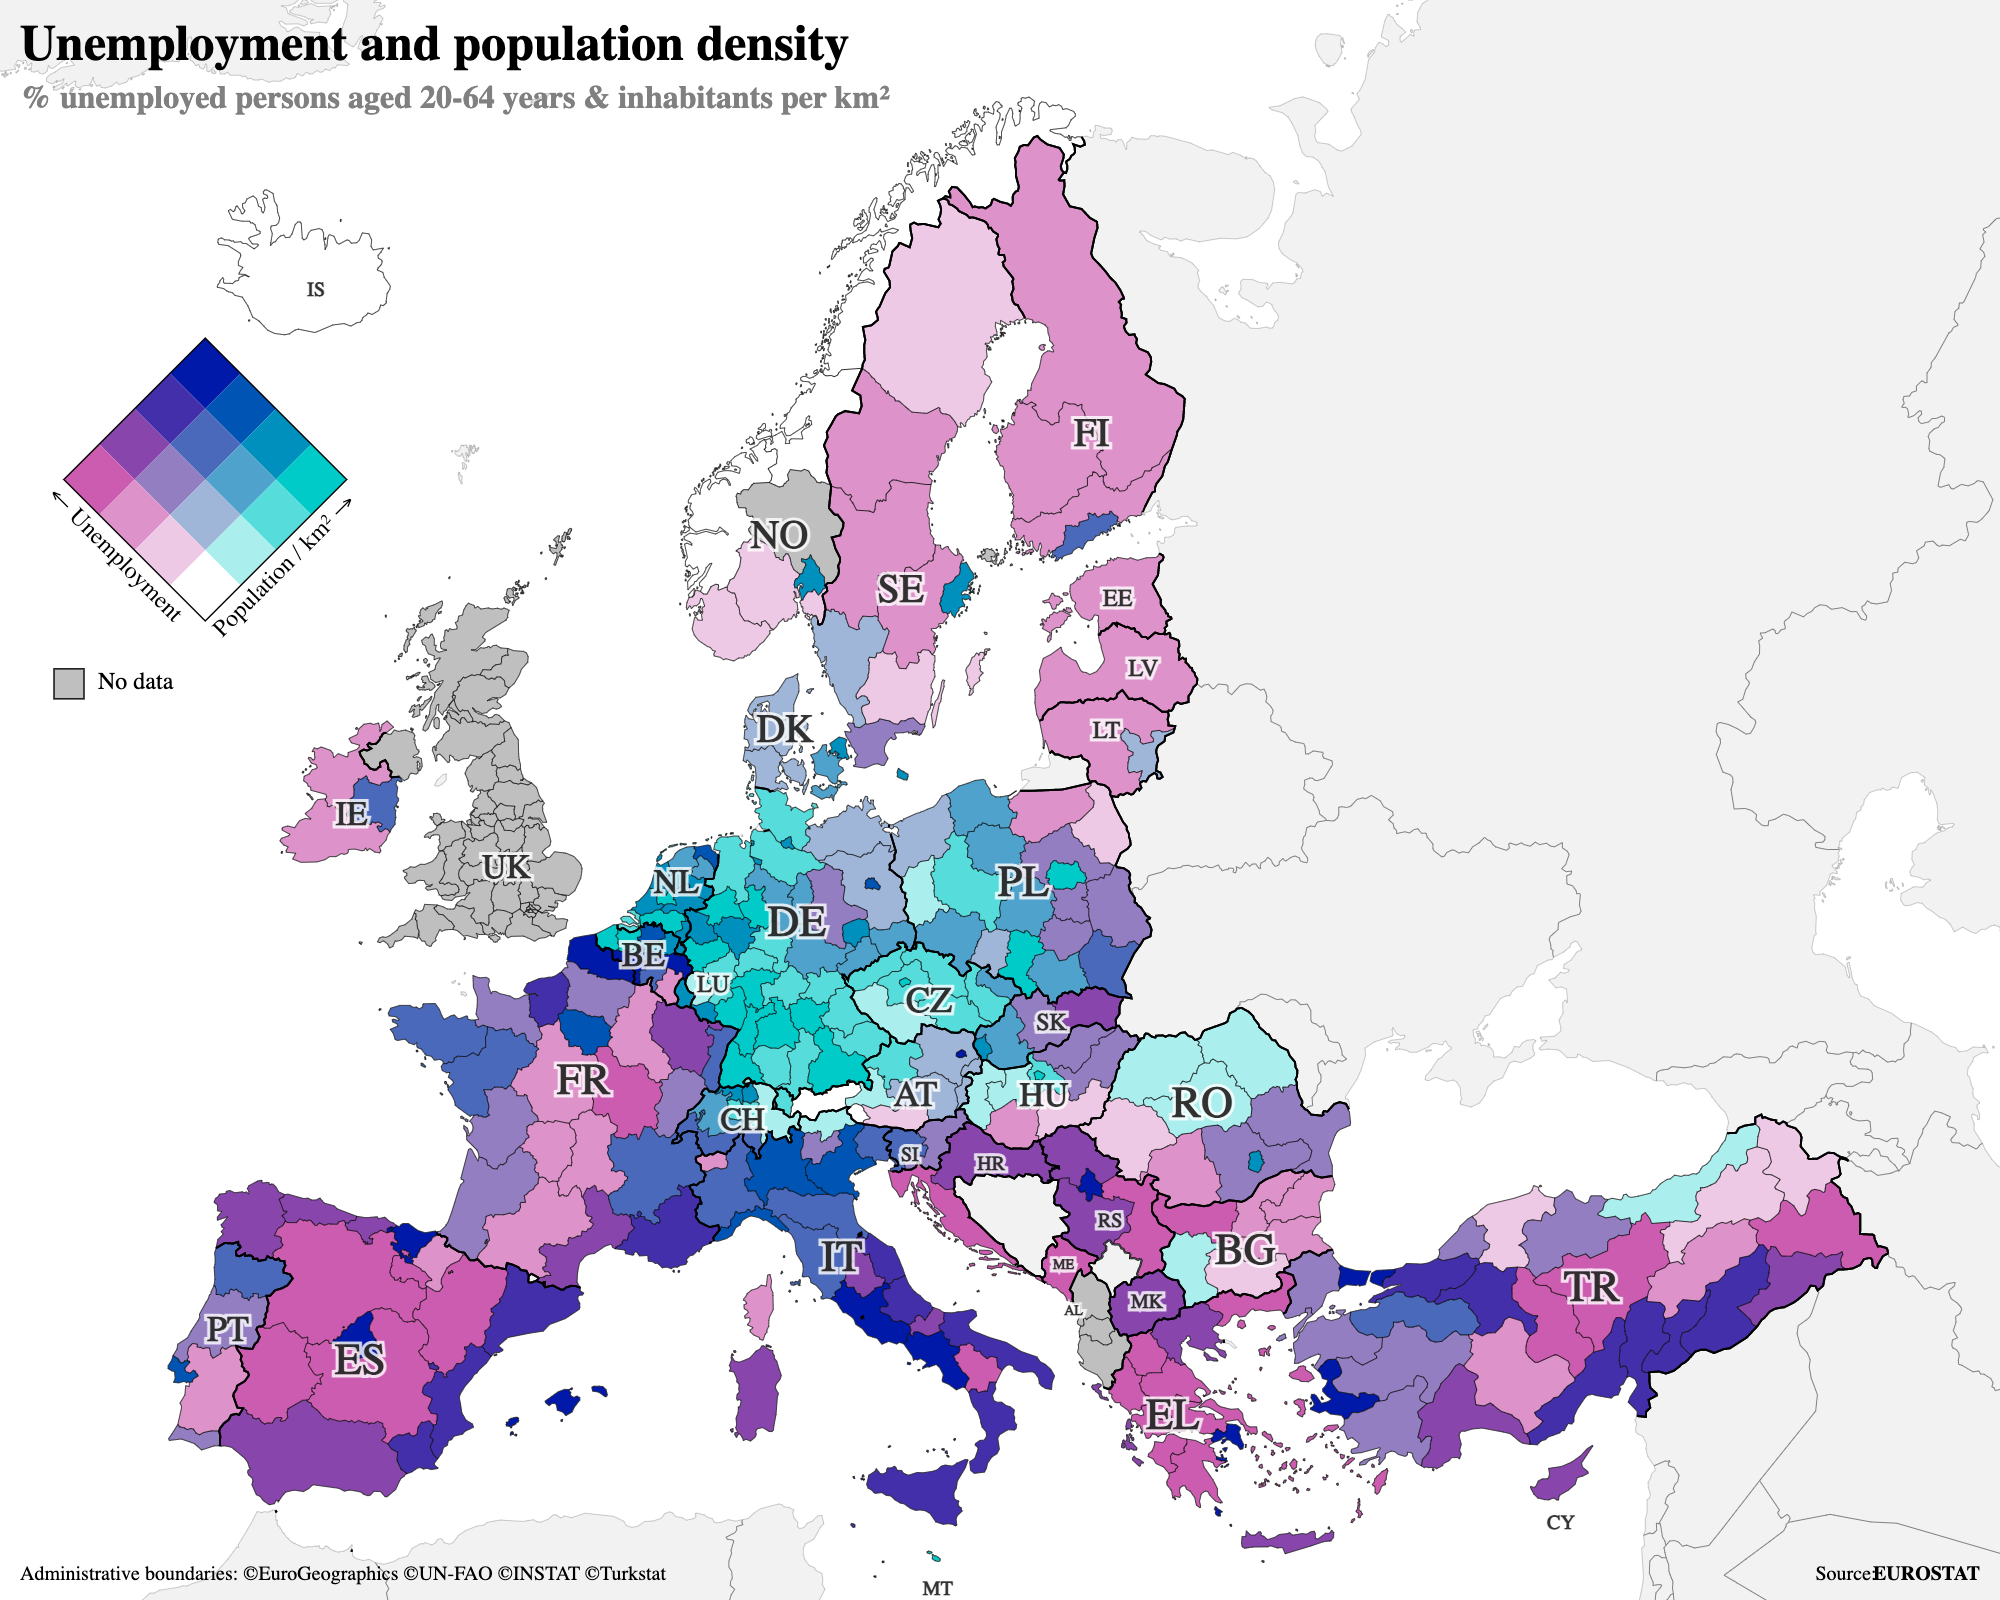 A bivariate choropleth map showing unemployment rates and population density of EU regions